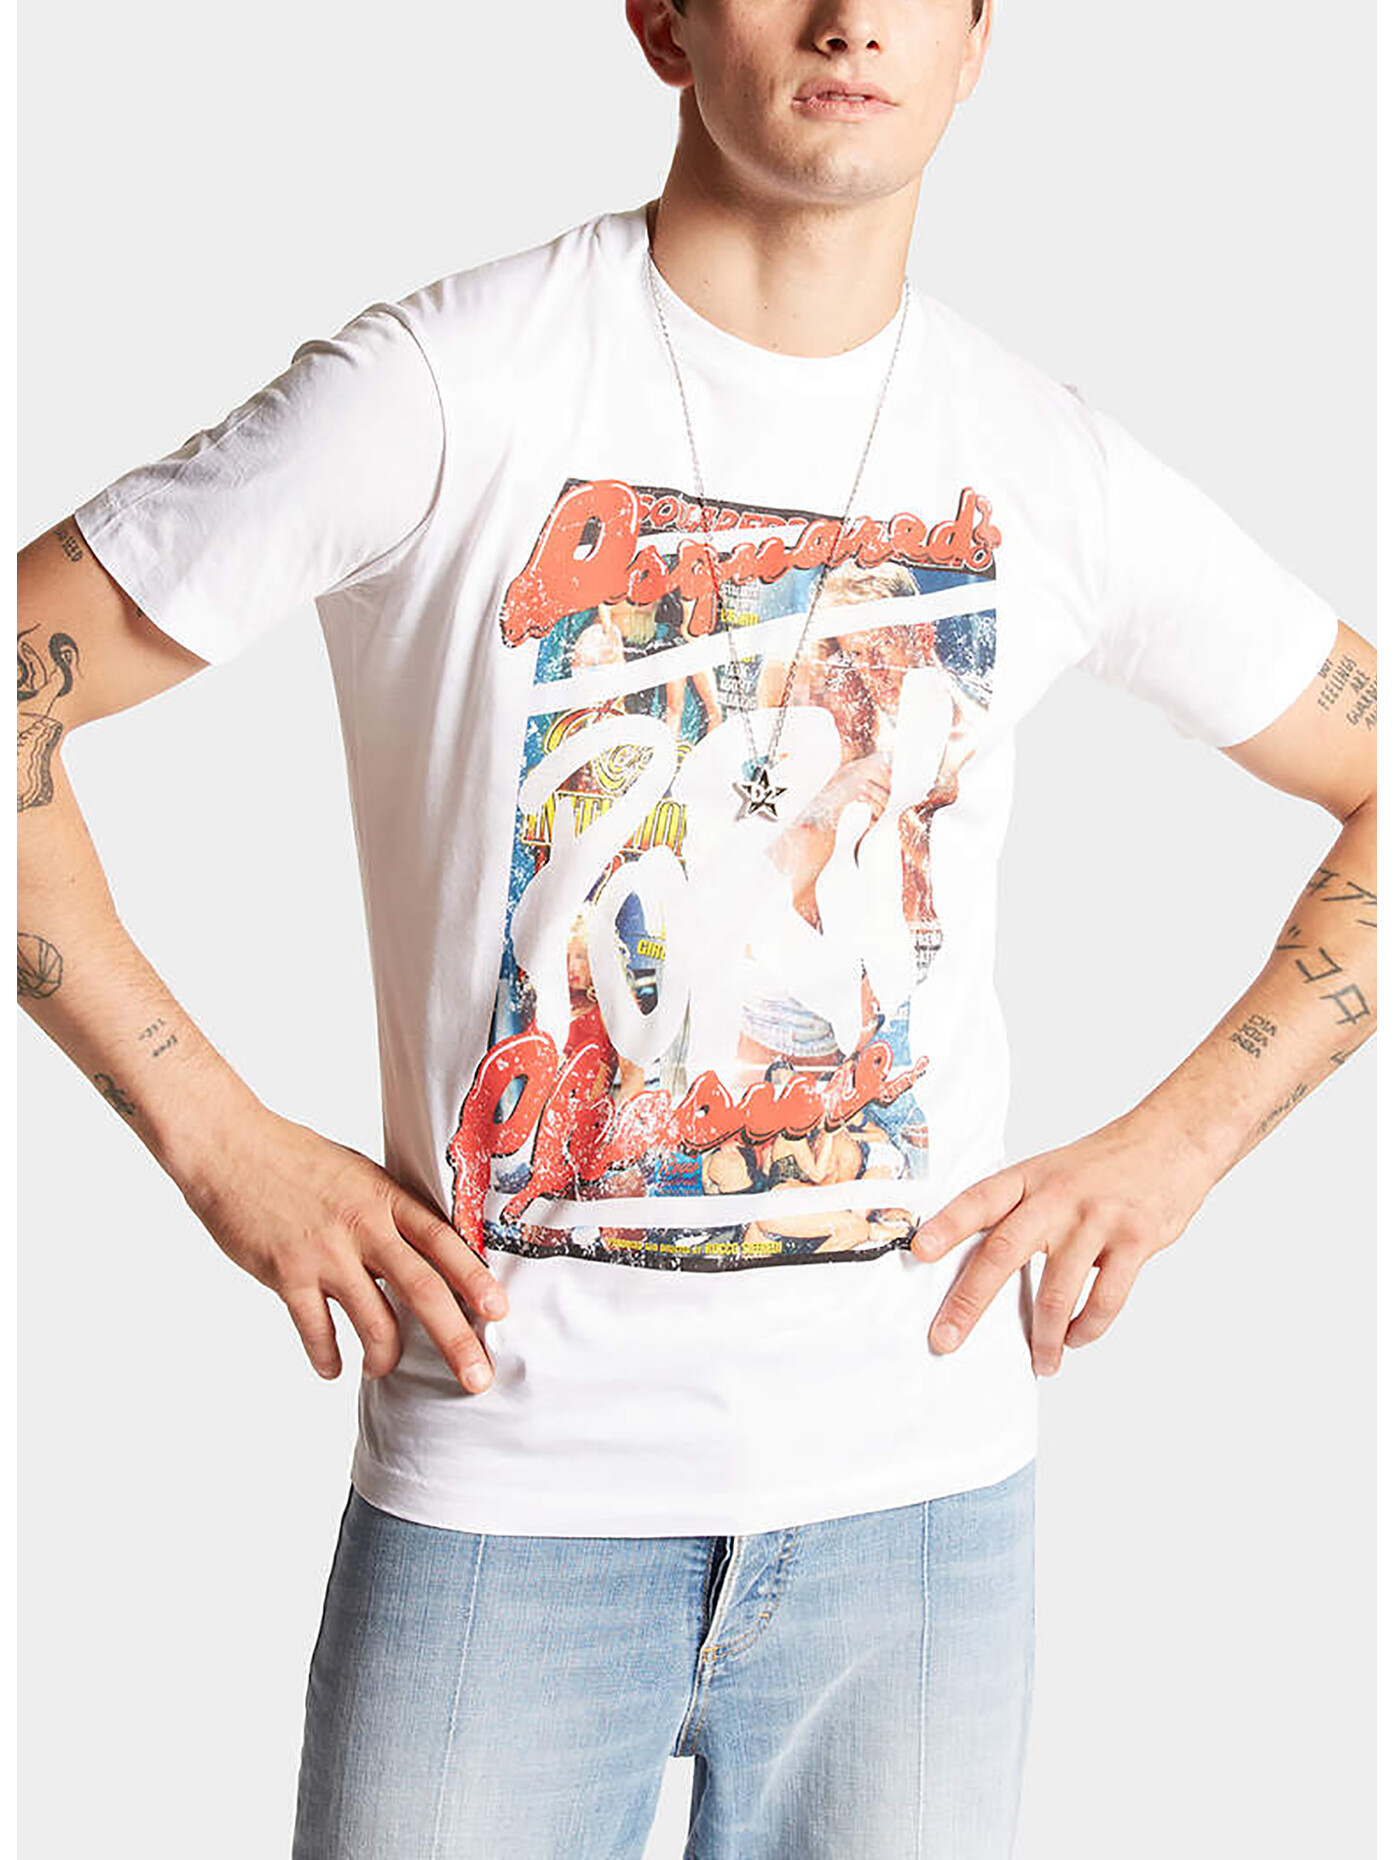 dsquared t-shirt rocco cool fit tee, uomo